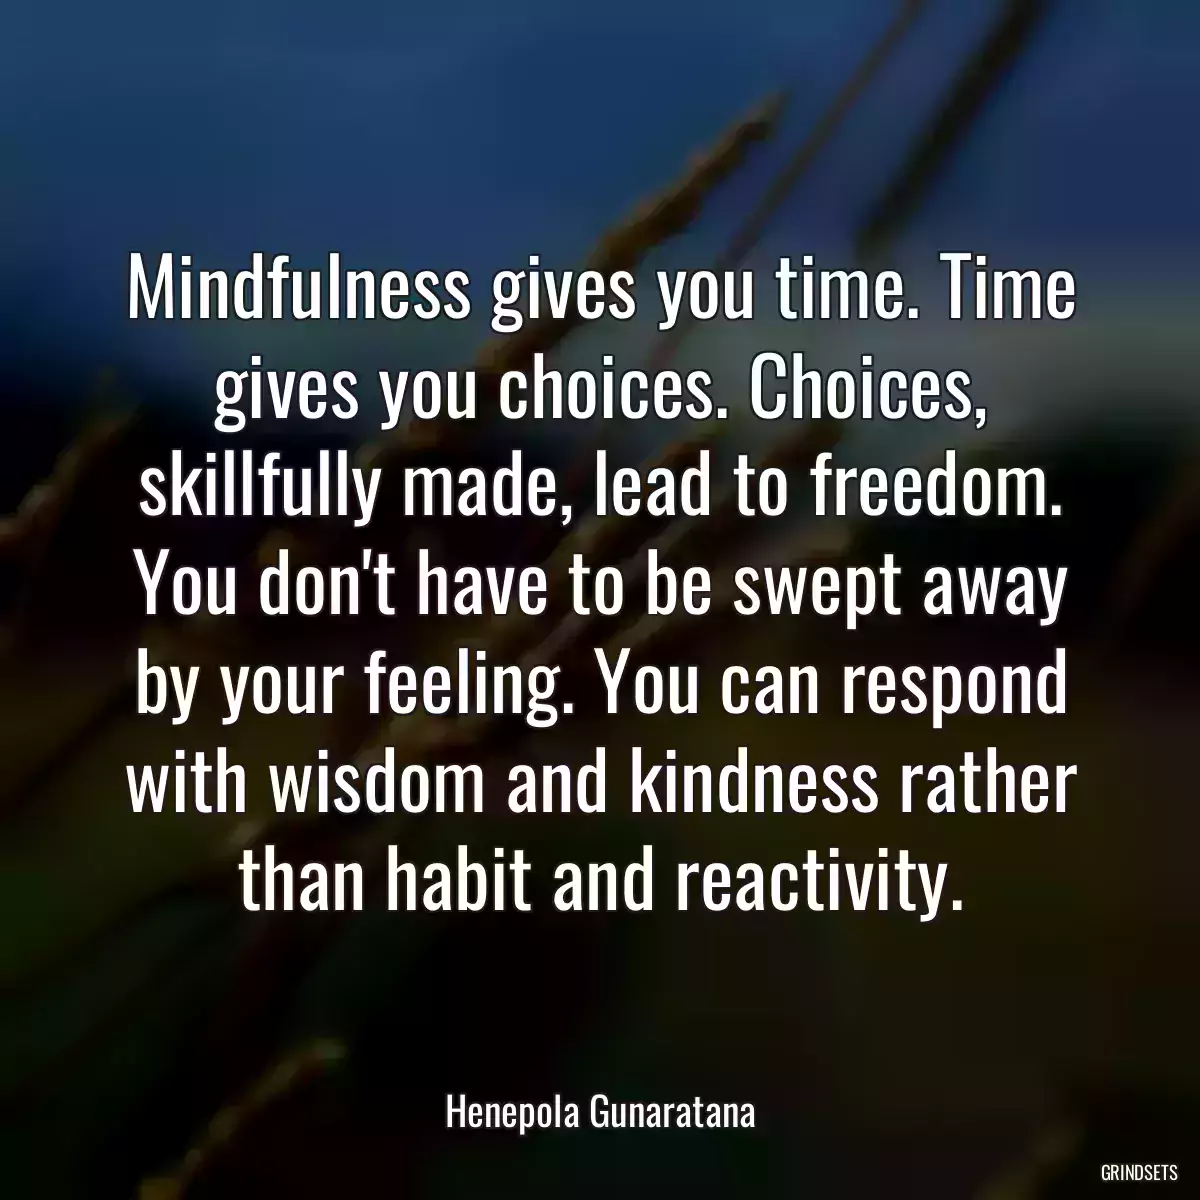 Mindfulness gives you time. Time gives you choices. Choices, skillfully made, lead to freedom. You don\'t have to be swept away by your feeling. You can respond with wisdom and kindness rather than habit and reactivity.